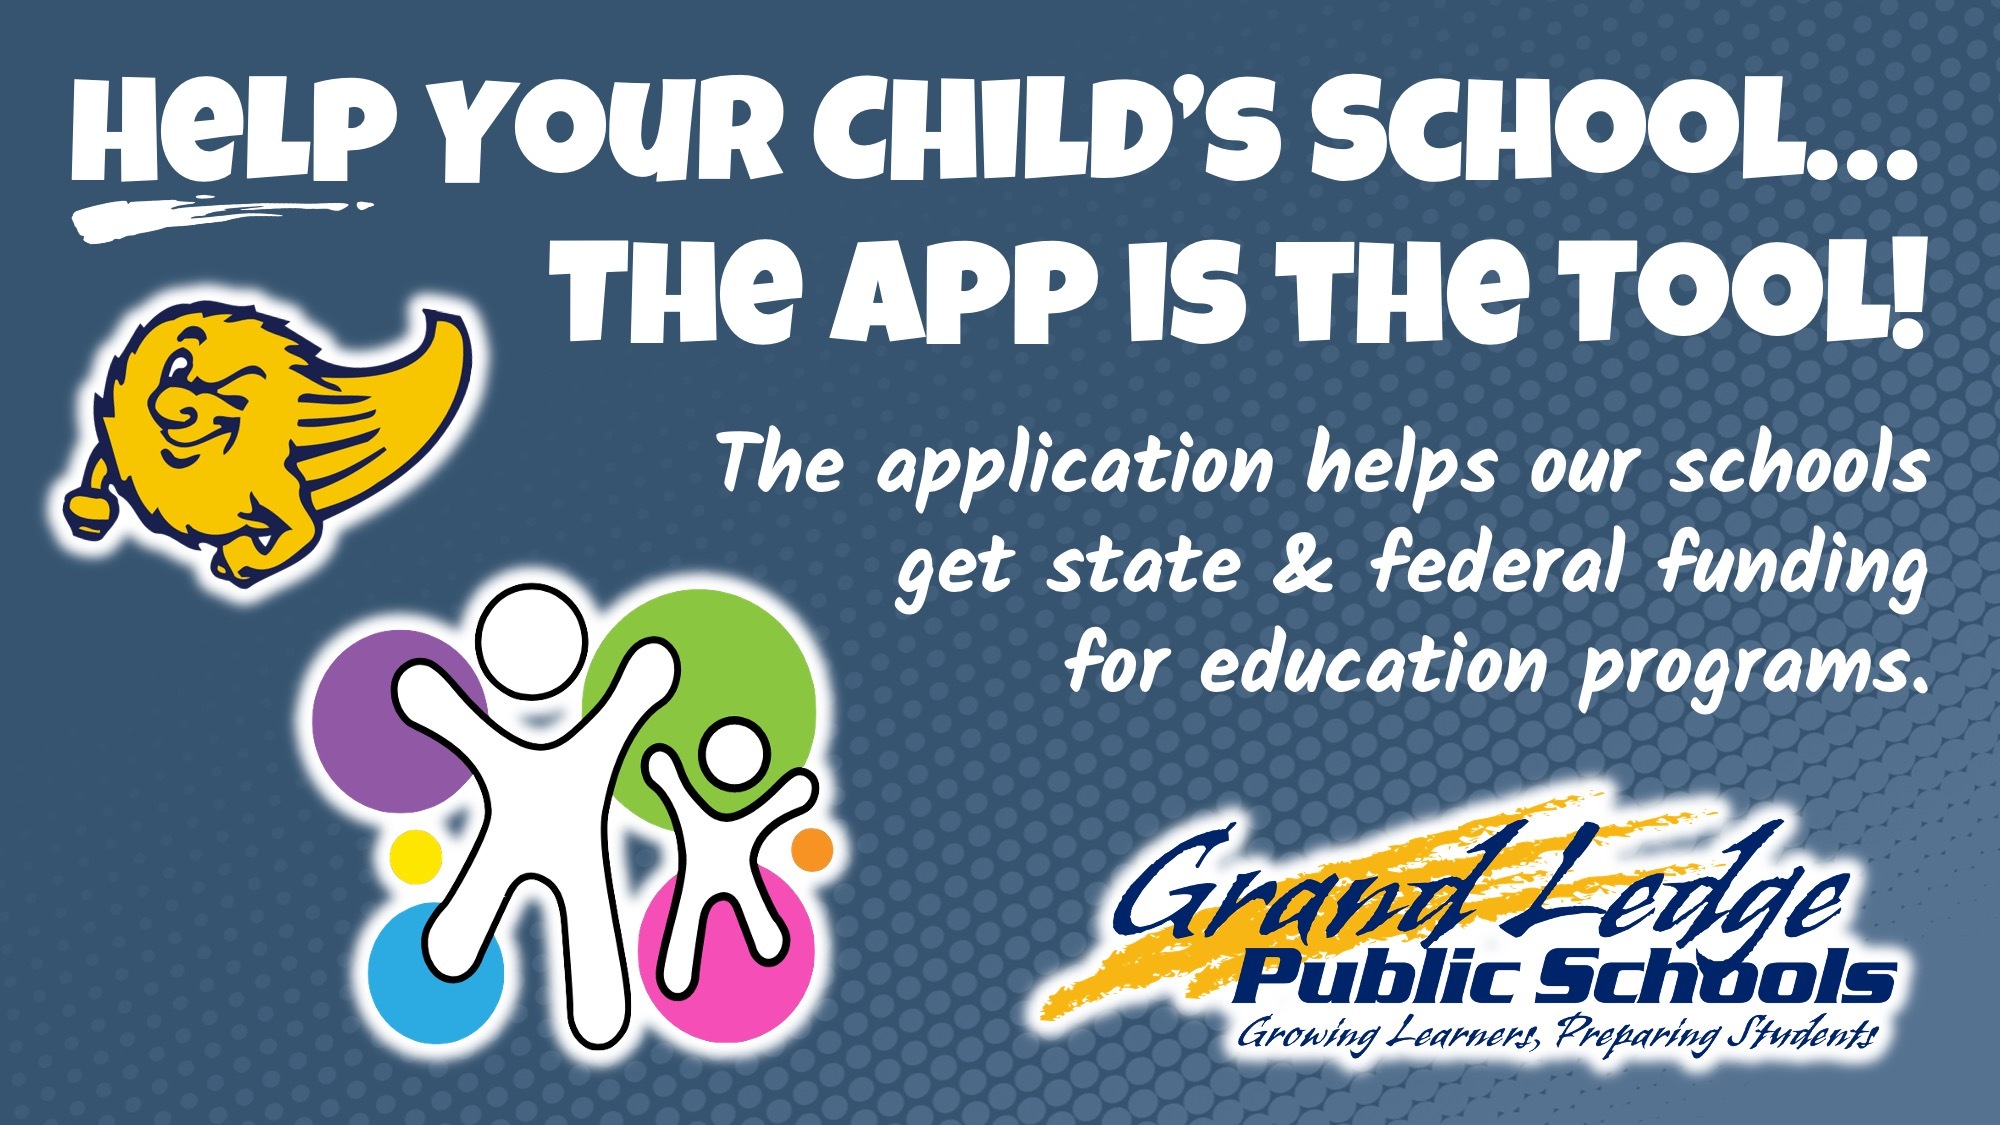 HELP YOUR CHILD'S SCHOOL... THE APP IS THE TOOL!